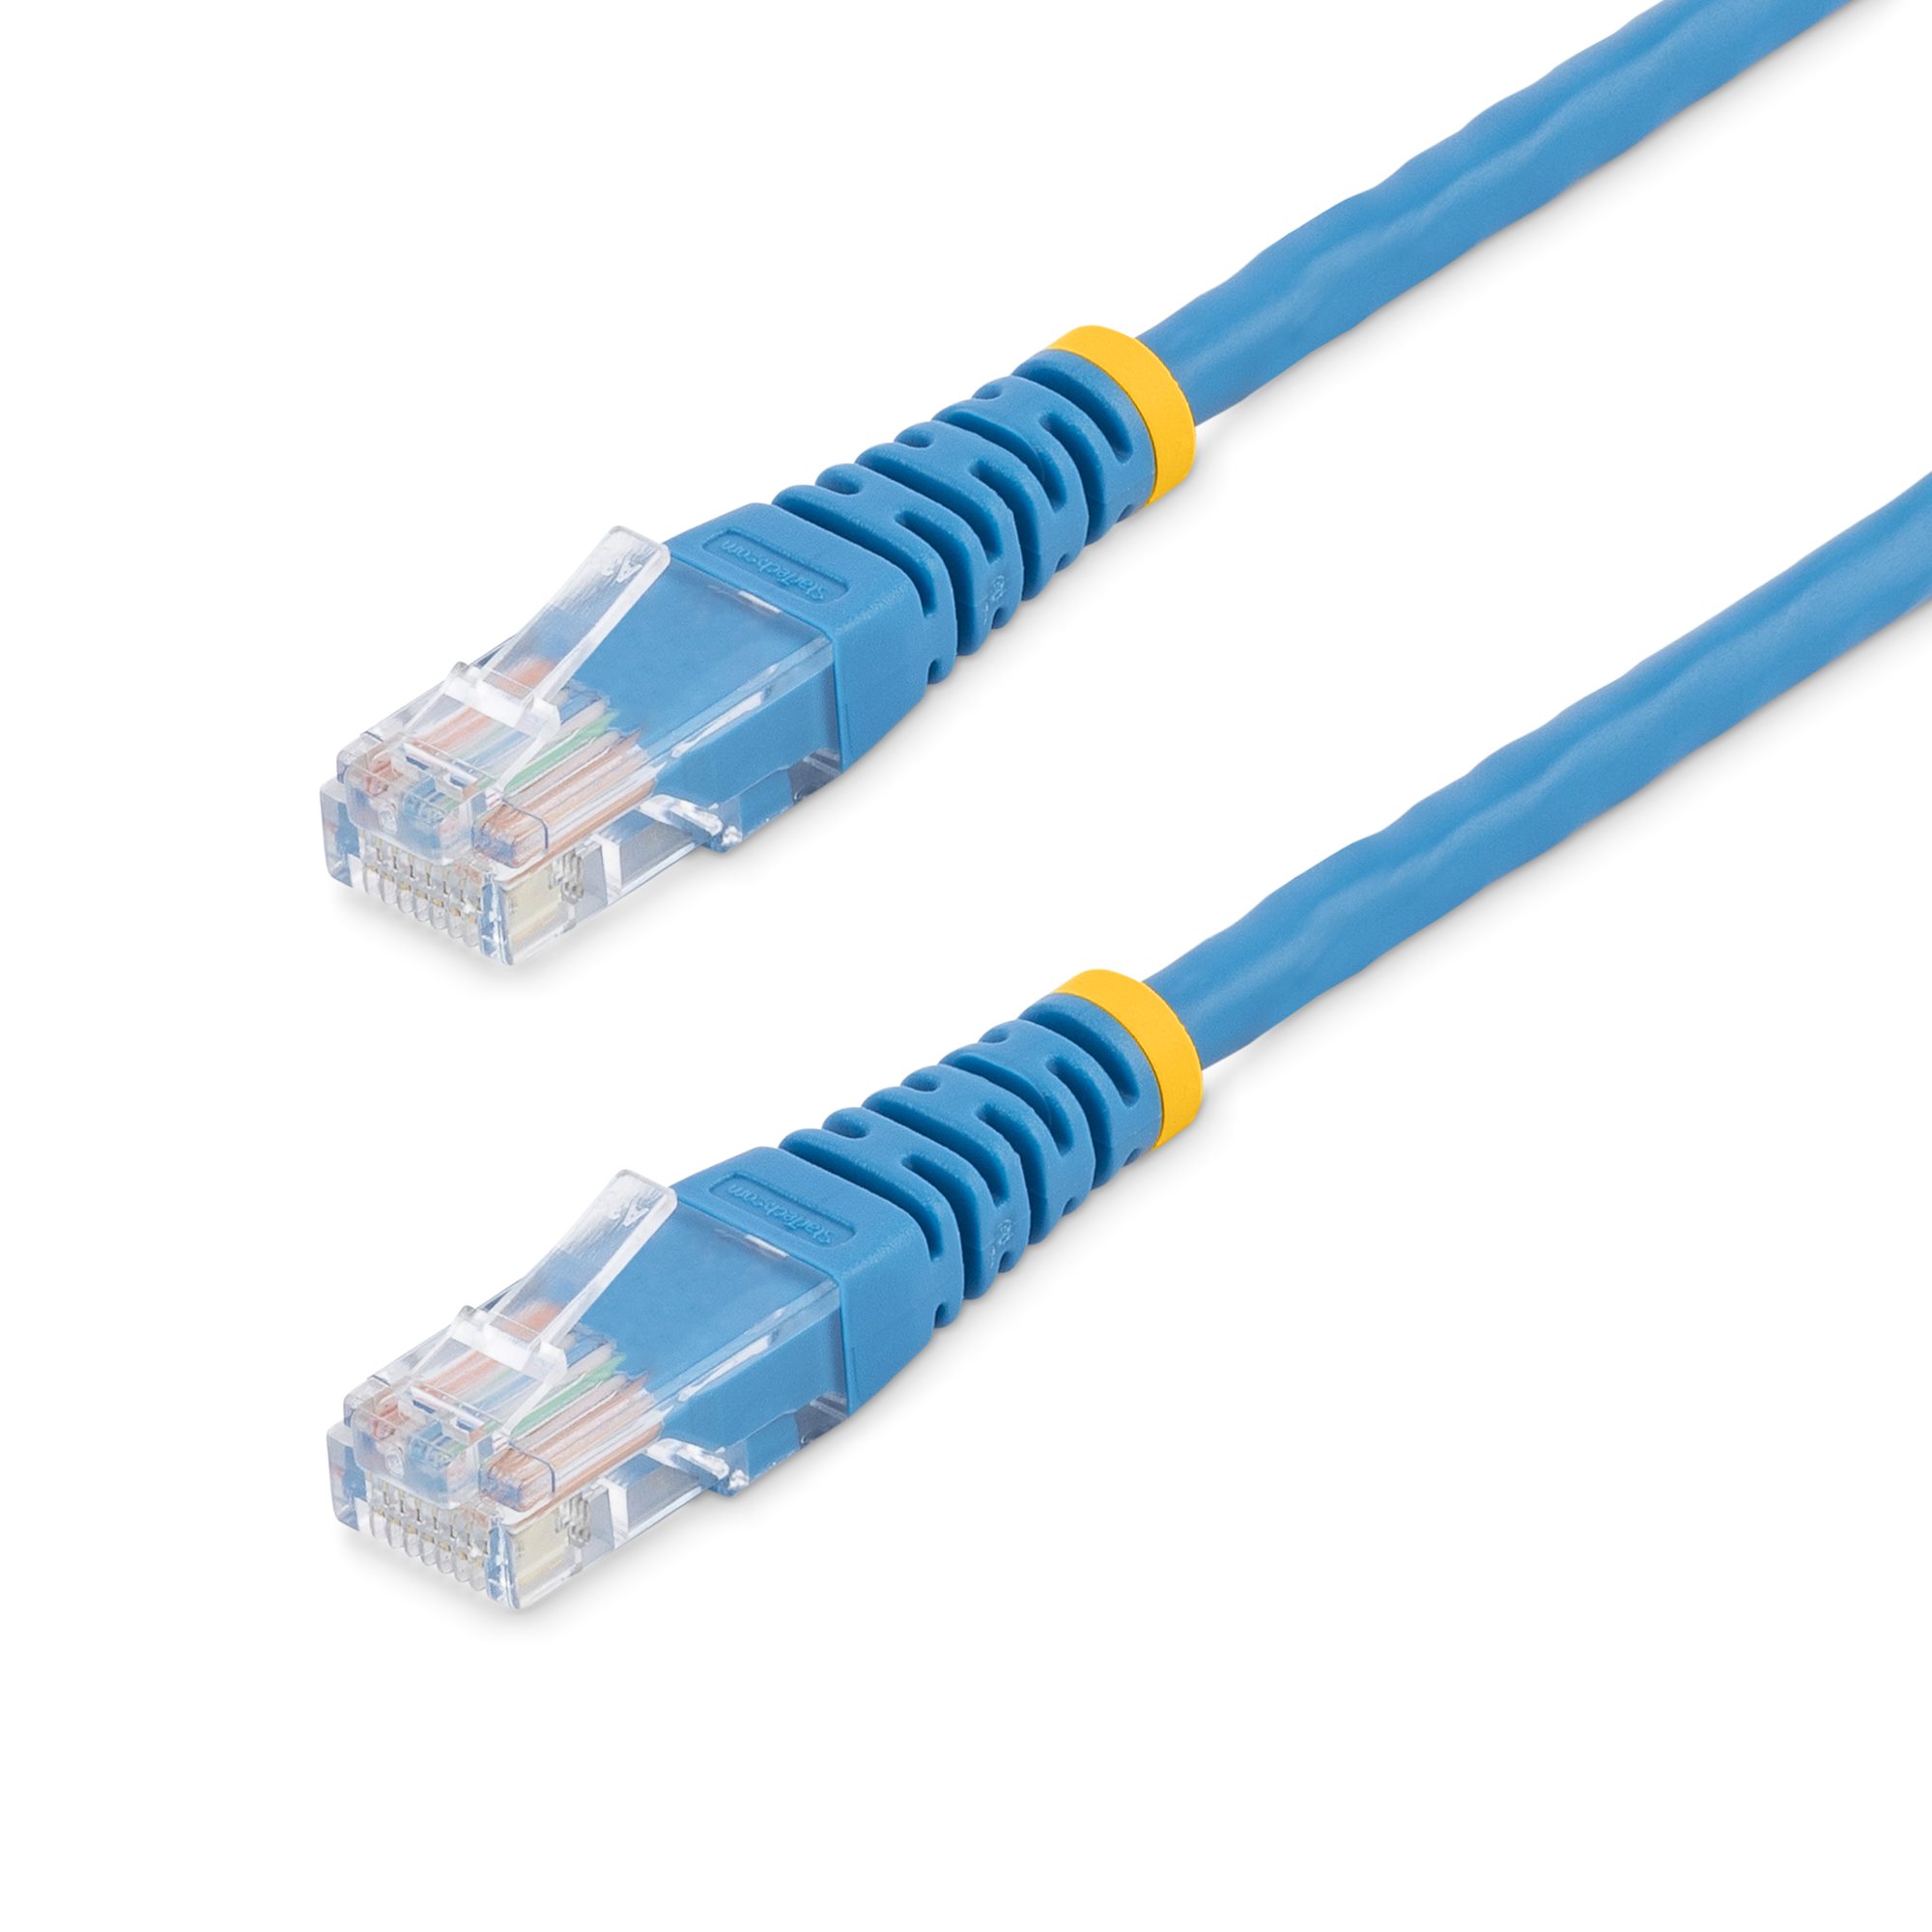 Standard Networking Cable Cat5e Ethernet Patch RJ45 LAN Internet Connection Cord 